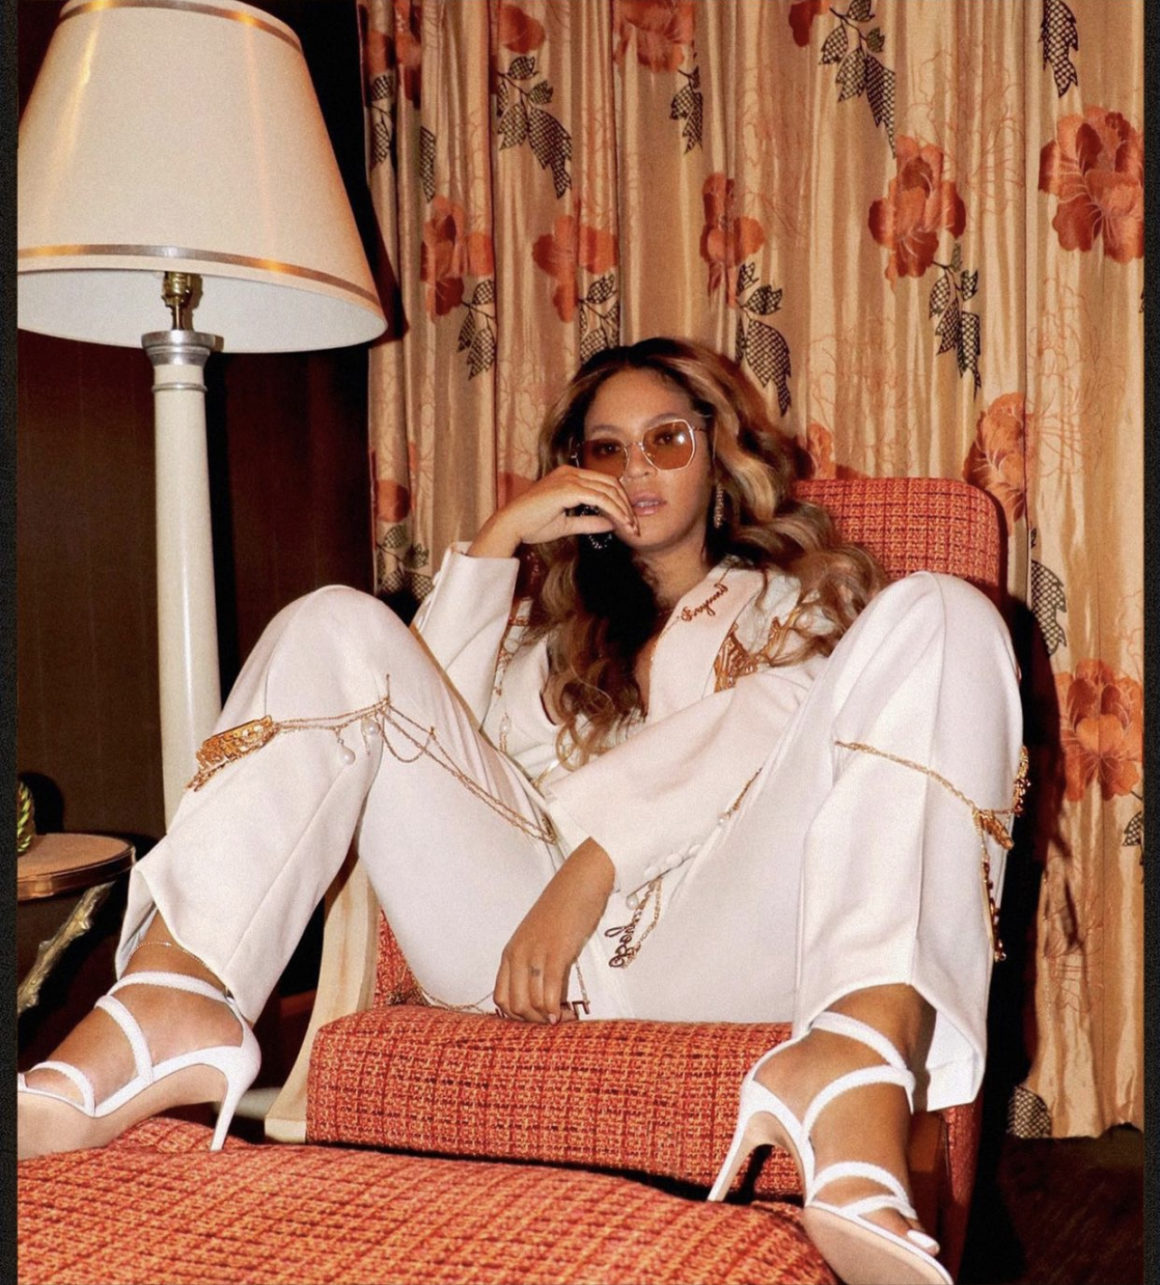 Beyoncé Spotted in Area White Custom NameChain Suit While In Las Vegas with JayZ Fashion Experts